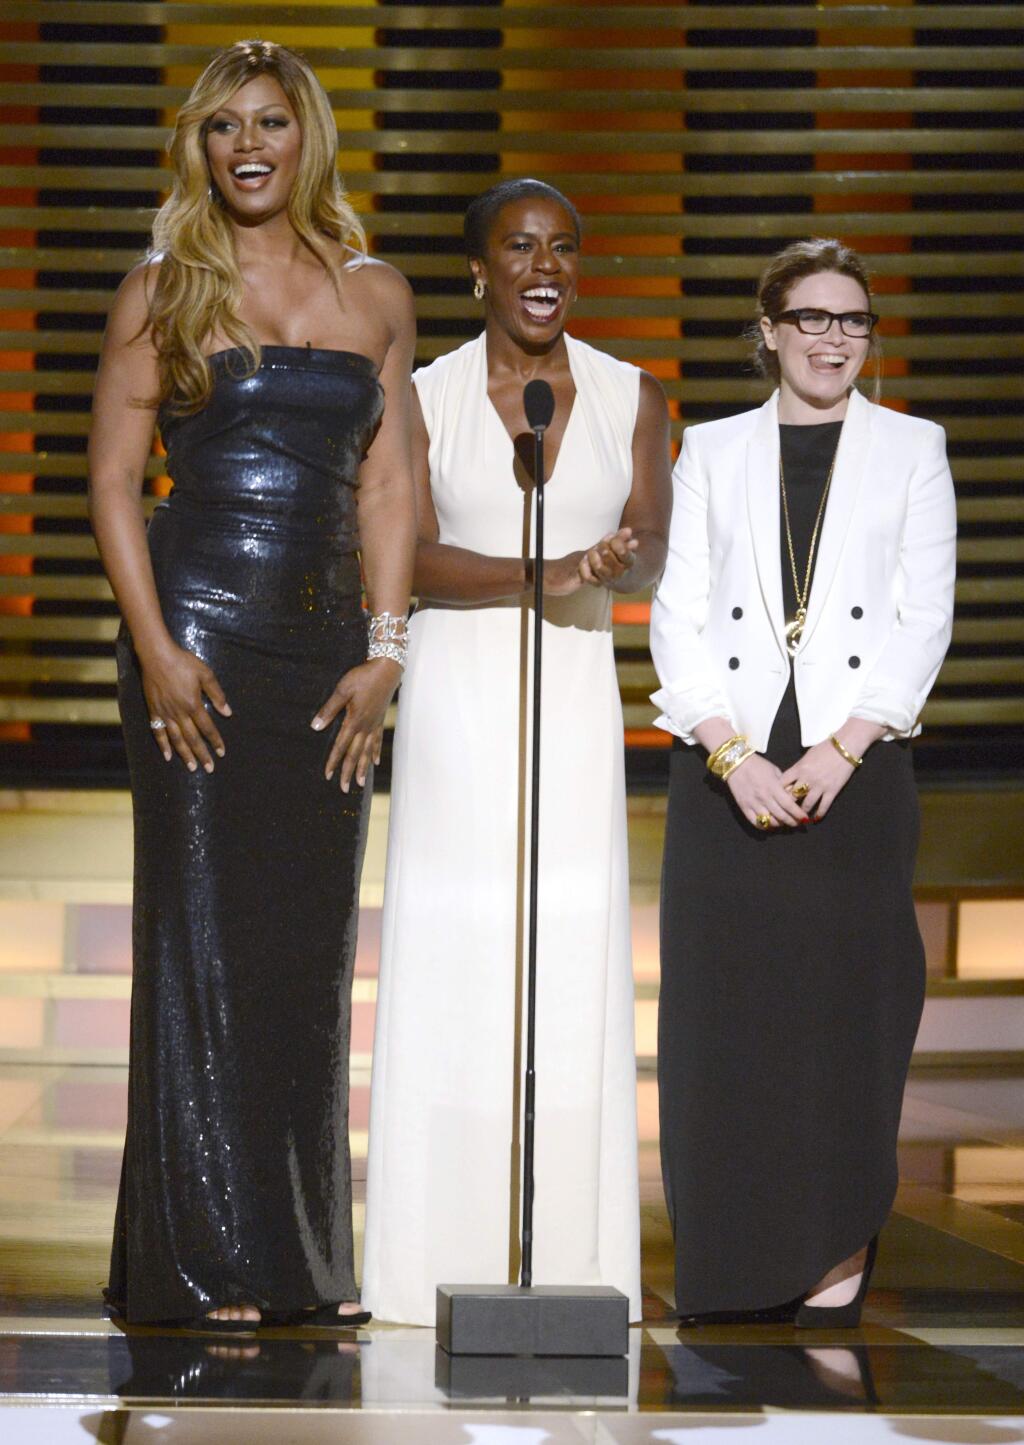 IMAGE DISTRIBUTED FOR THE TELEVISION ACADEMY - Laverne Cox, and from left, Uzo Aduba and Natasha Lyonne speak on stage at the Television Academy's Creative Arts Emmy Awards at the Nokia Theater L.A. LIVE on Saturday, Aug. 16, 2014, in Los Angeles. (Photo by Phil McCarten/Invision for the Television Academy/AP Images)